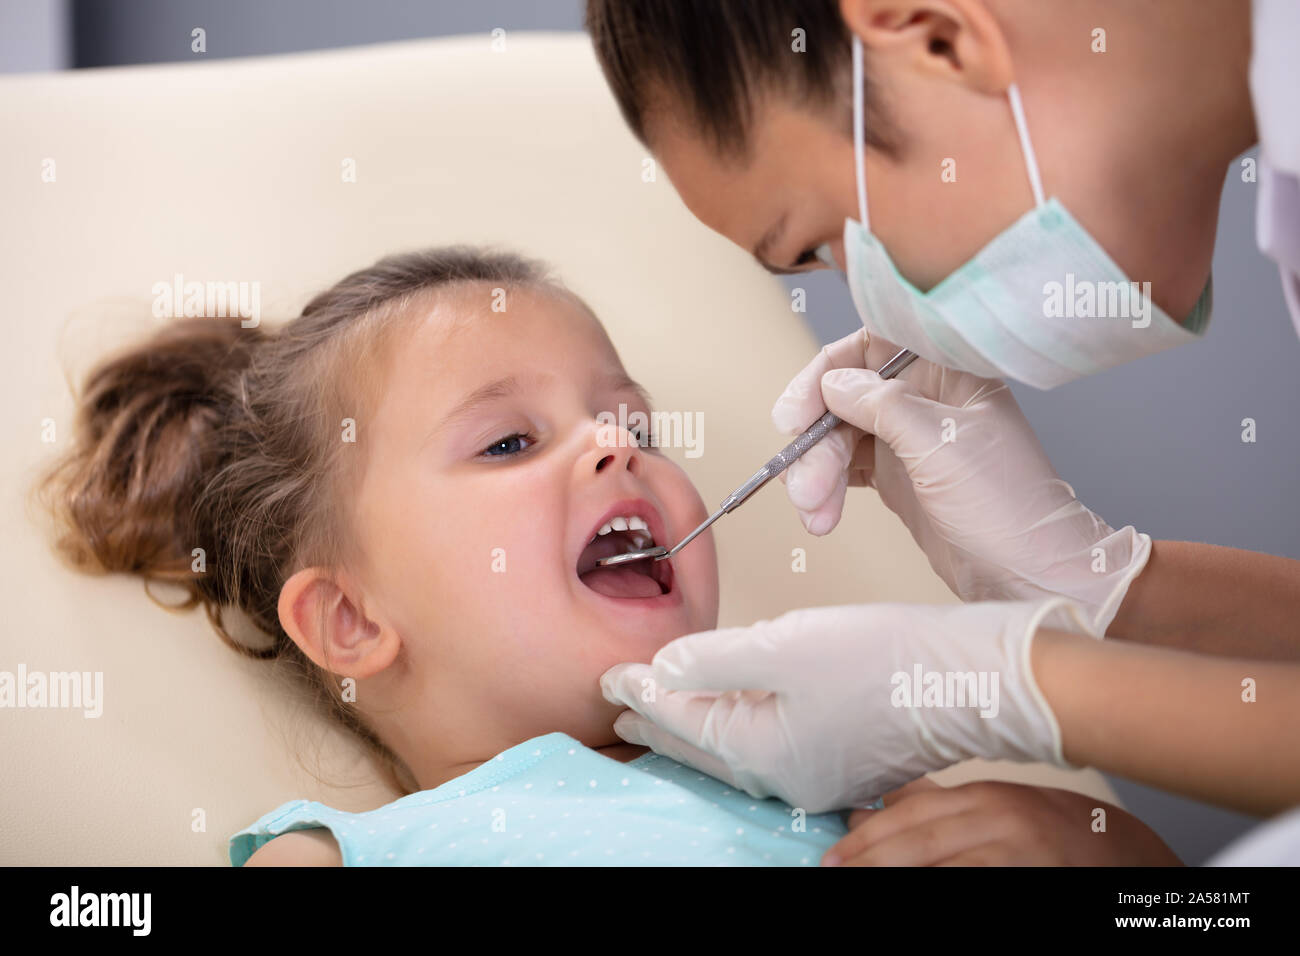 Close-up Of A Pediatric Dentist Examining A Little Girls Teeth In The Dentists Chair Stock Photo